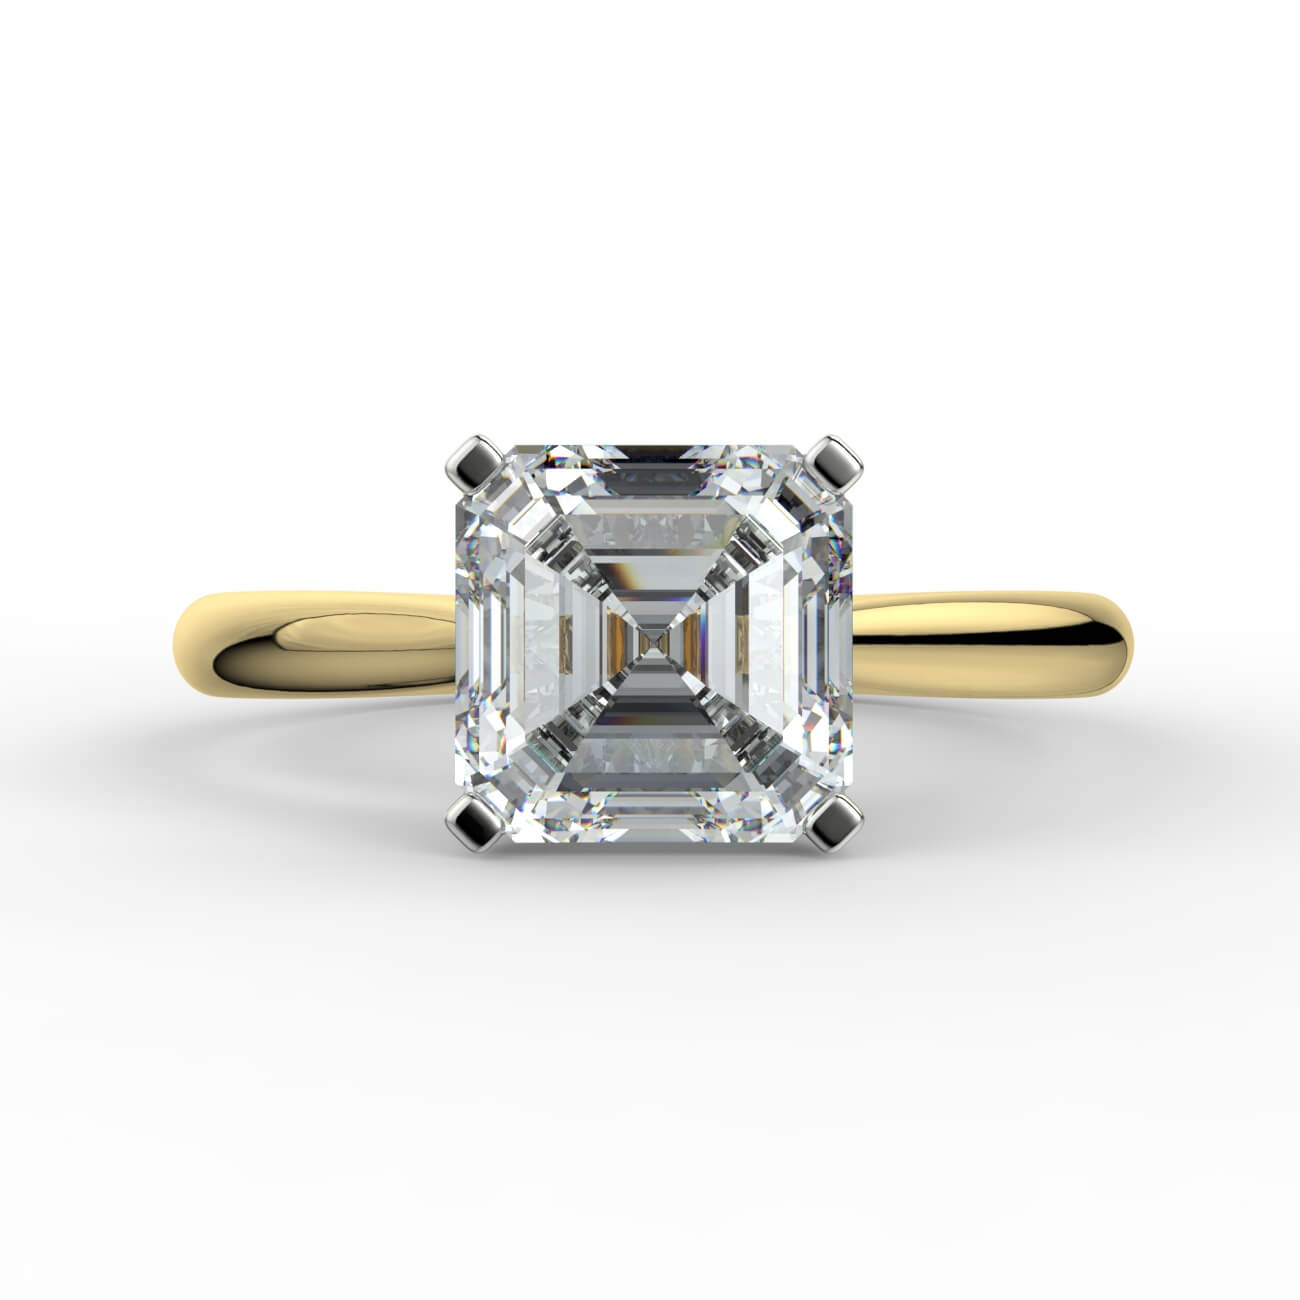 Asscher cut diamond cathedral engagement ring in white and yellow gold – Australian Diamond Network